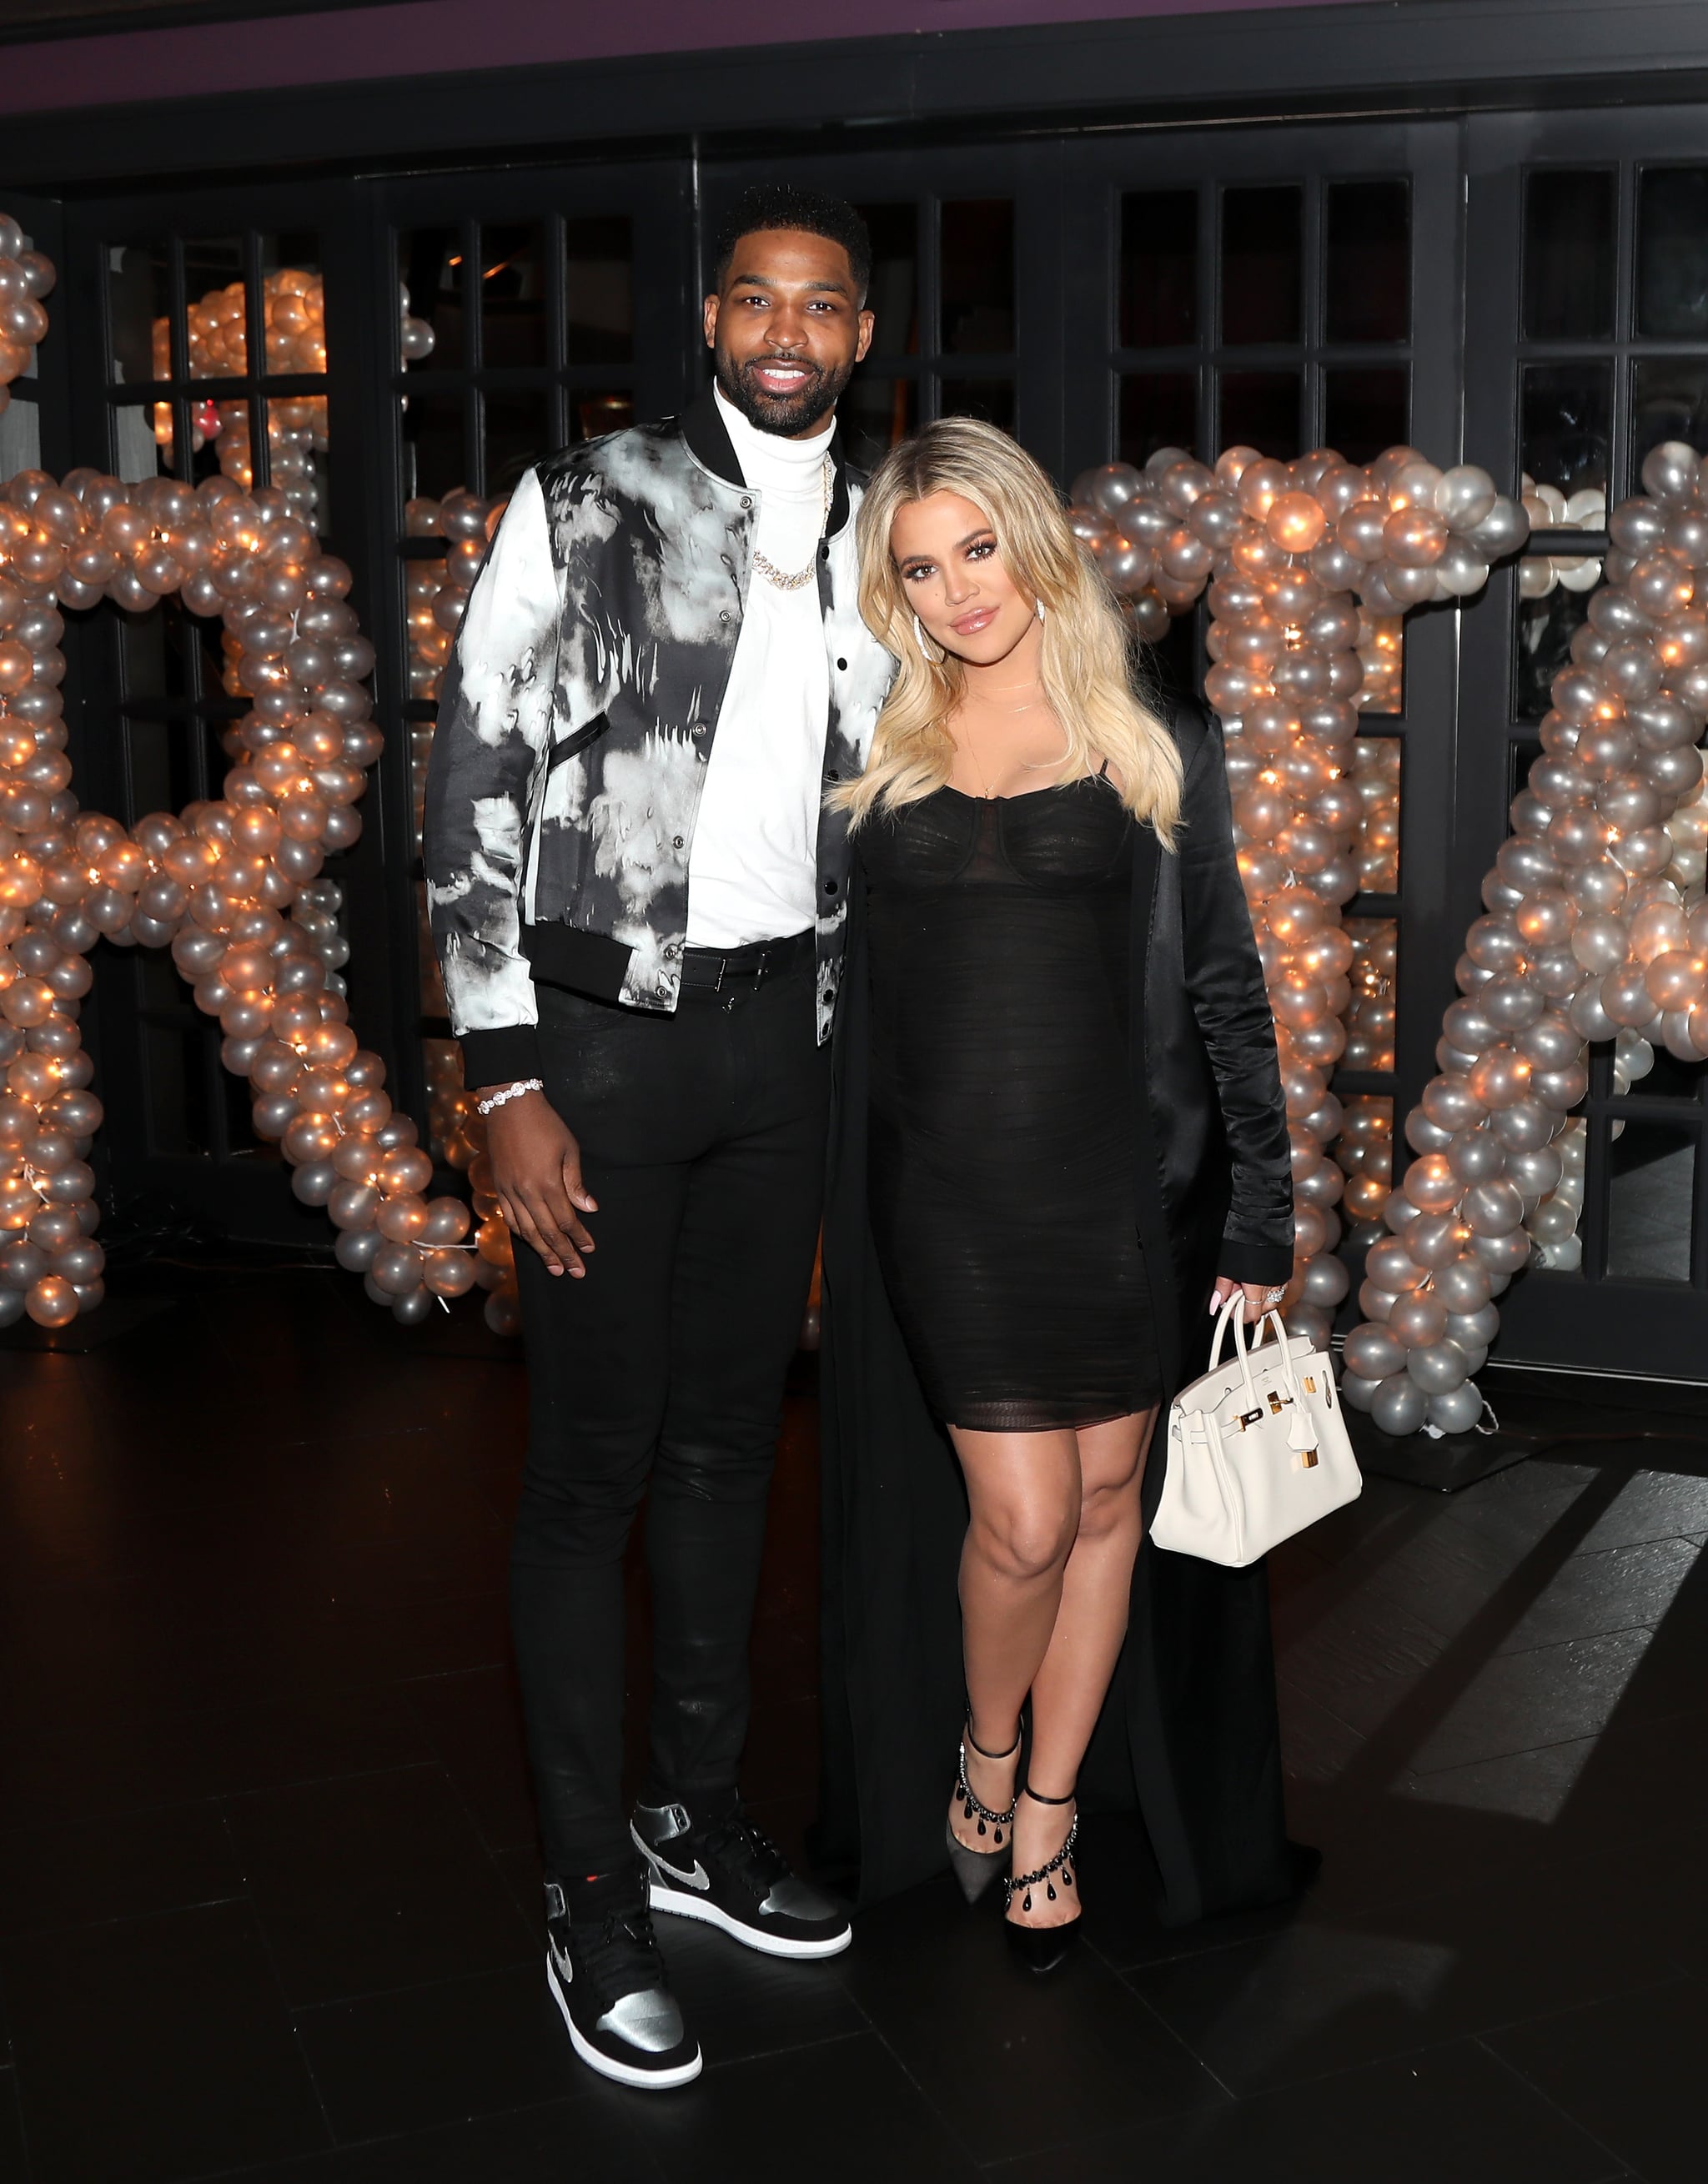 LOS ANGELES, CA - MARCH 10:  Tristan Thompson and Khloe Kardashian pose for a photo as Remy Martin celebrates Tristan Thompson's Birthday at Beauty & Essex on March 10, 2018 in Los Angeles, California.  (Photo by Jerritt Clark/Getty Images for Remy Martin )